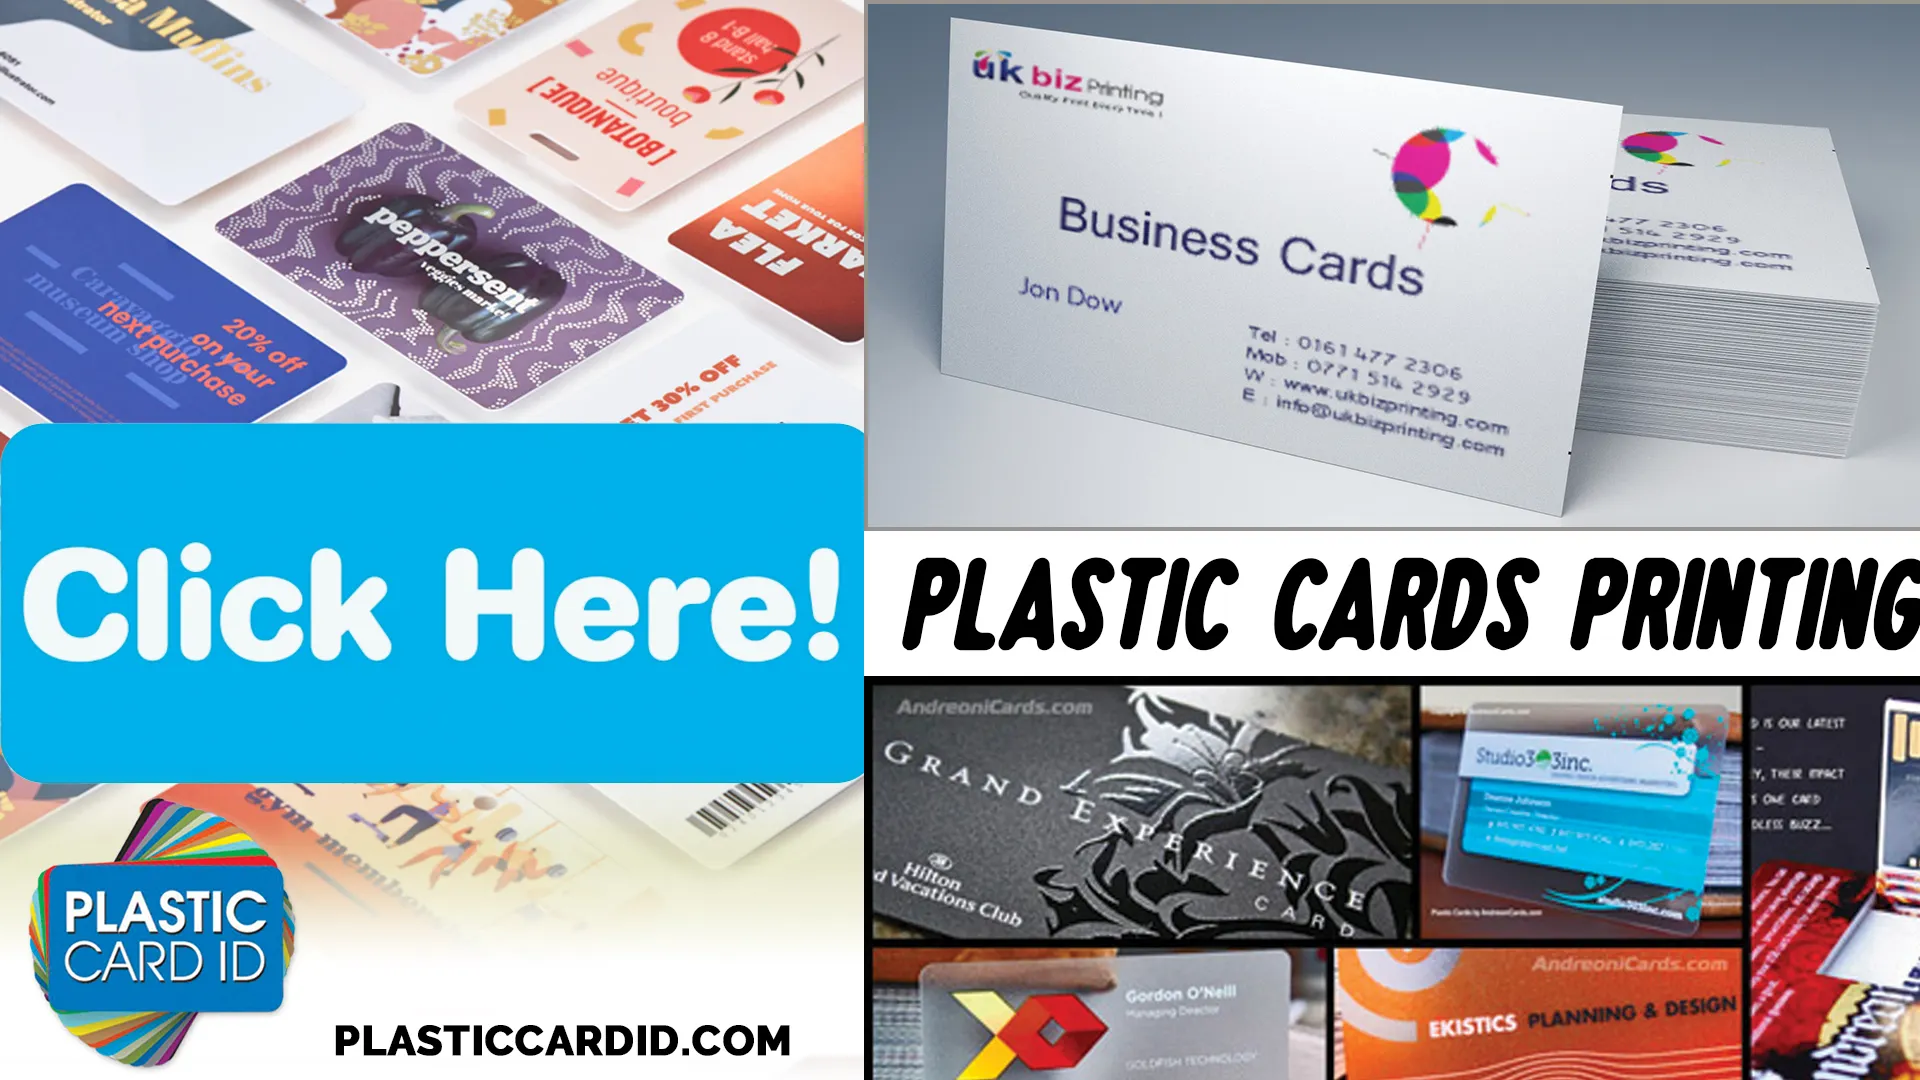 Making the Most of Your Business Cards